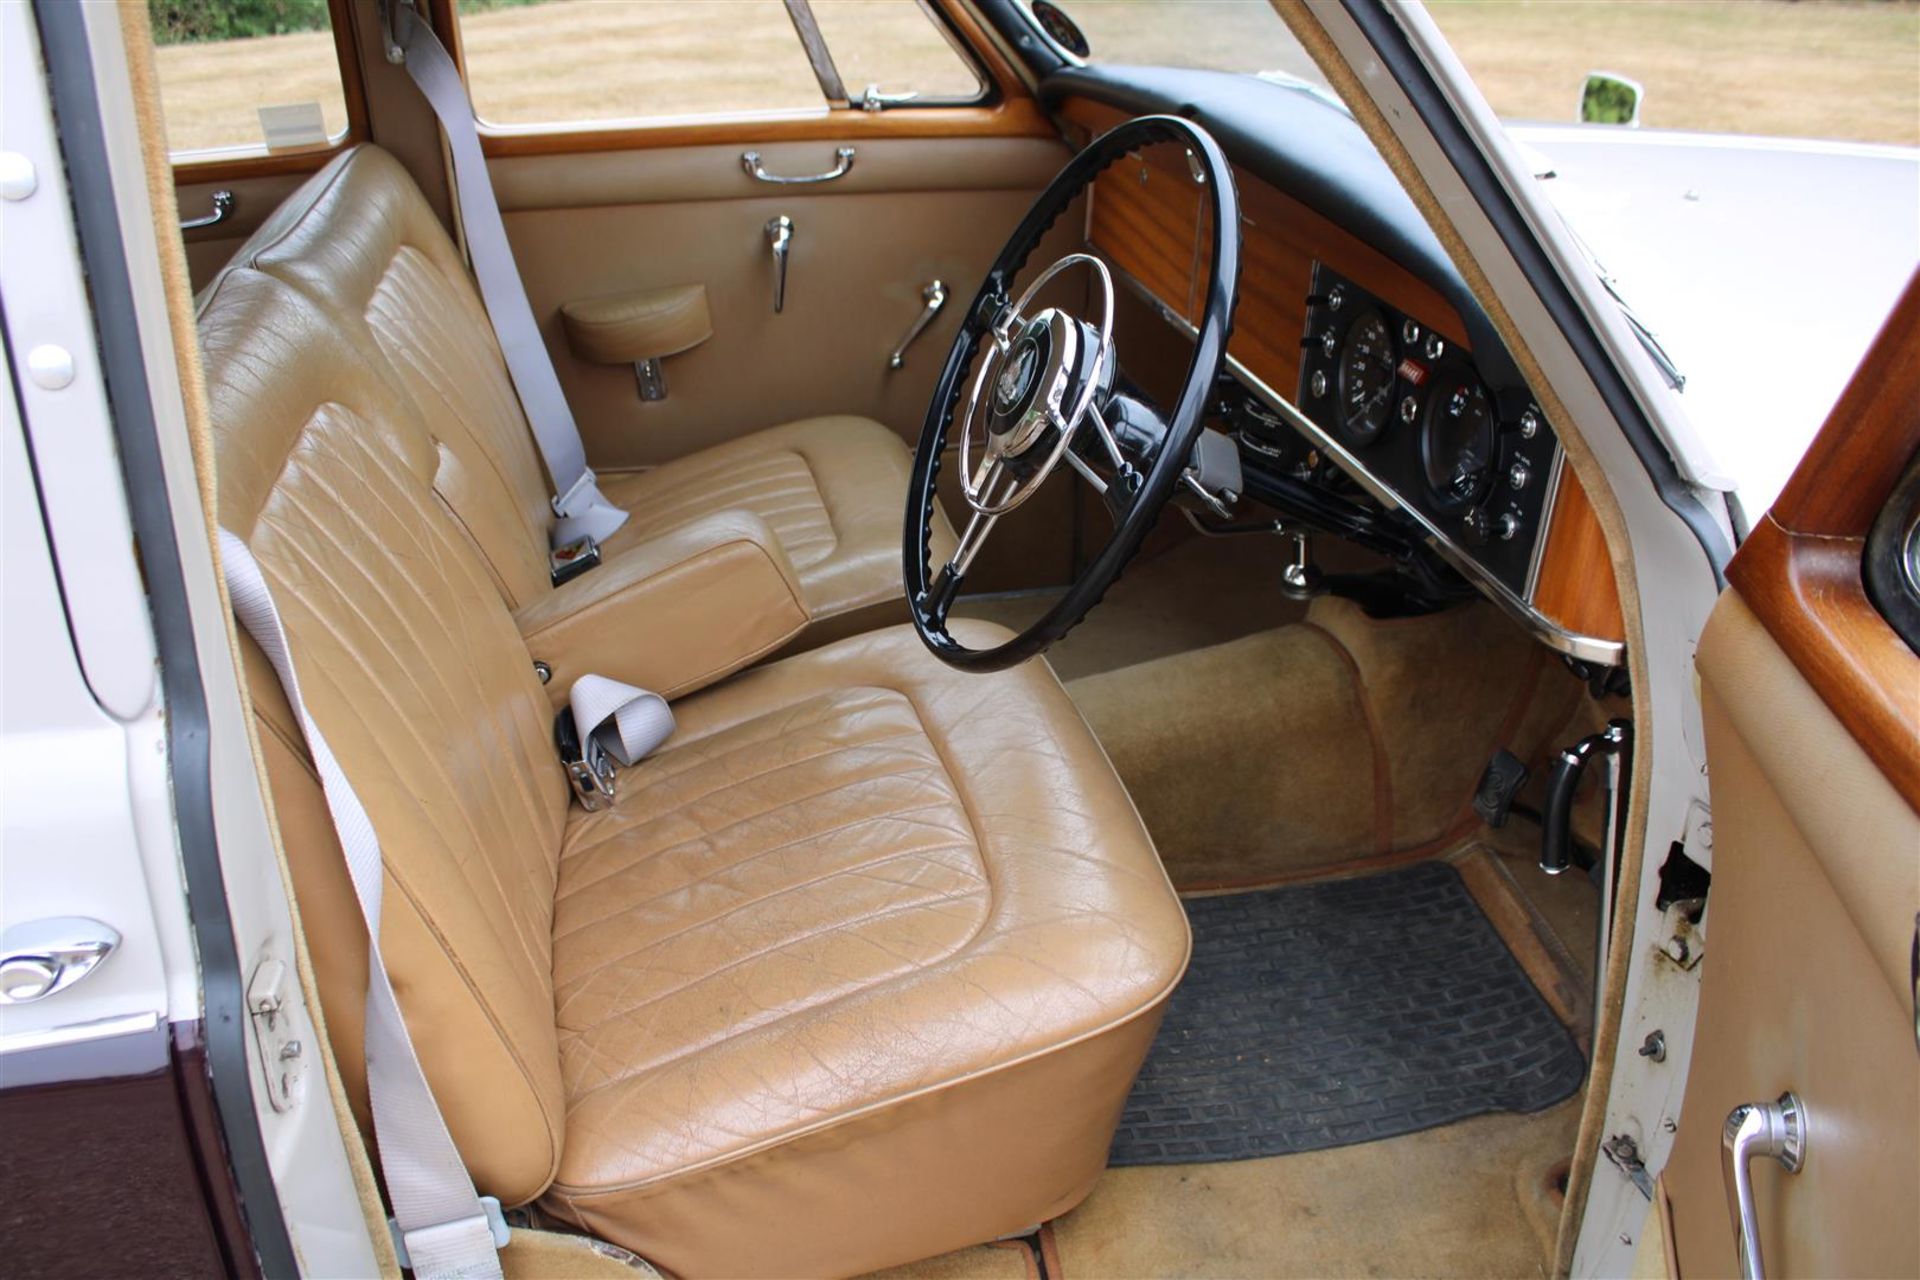 1964 Rover P4 95 Saloon - Image 7 of 23